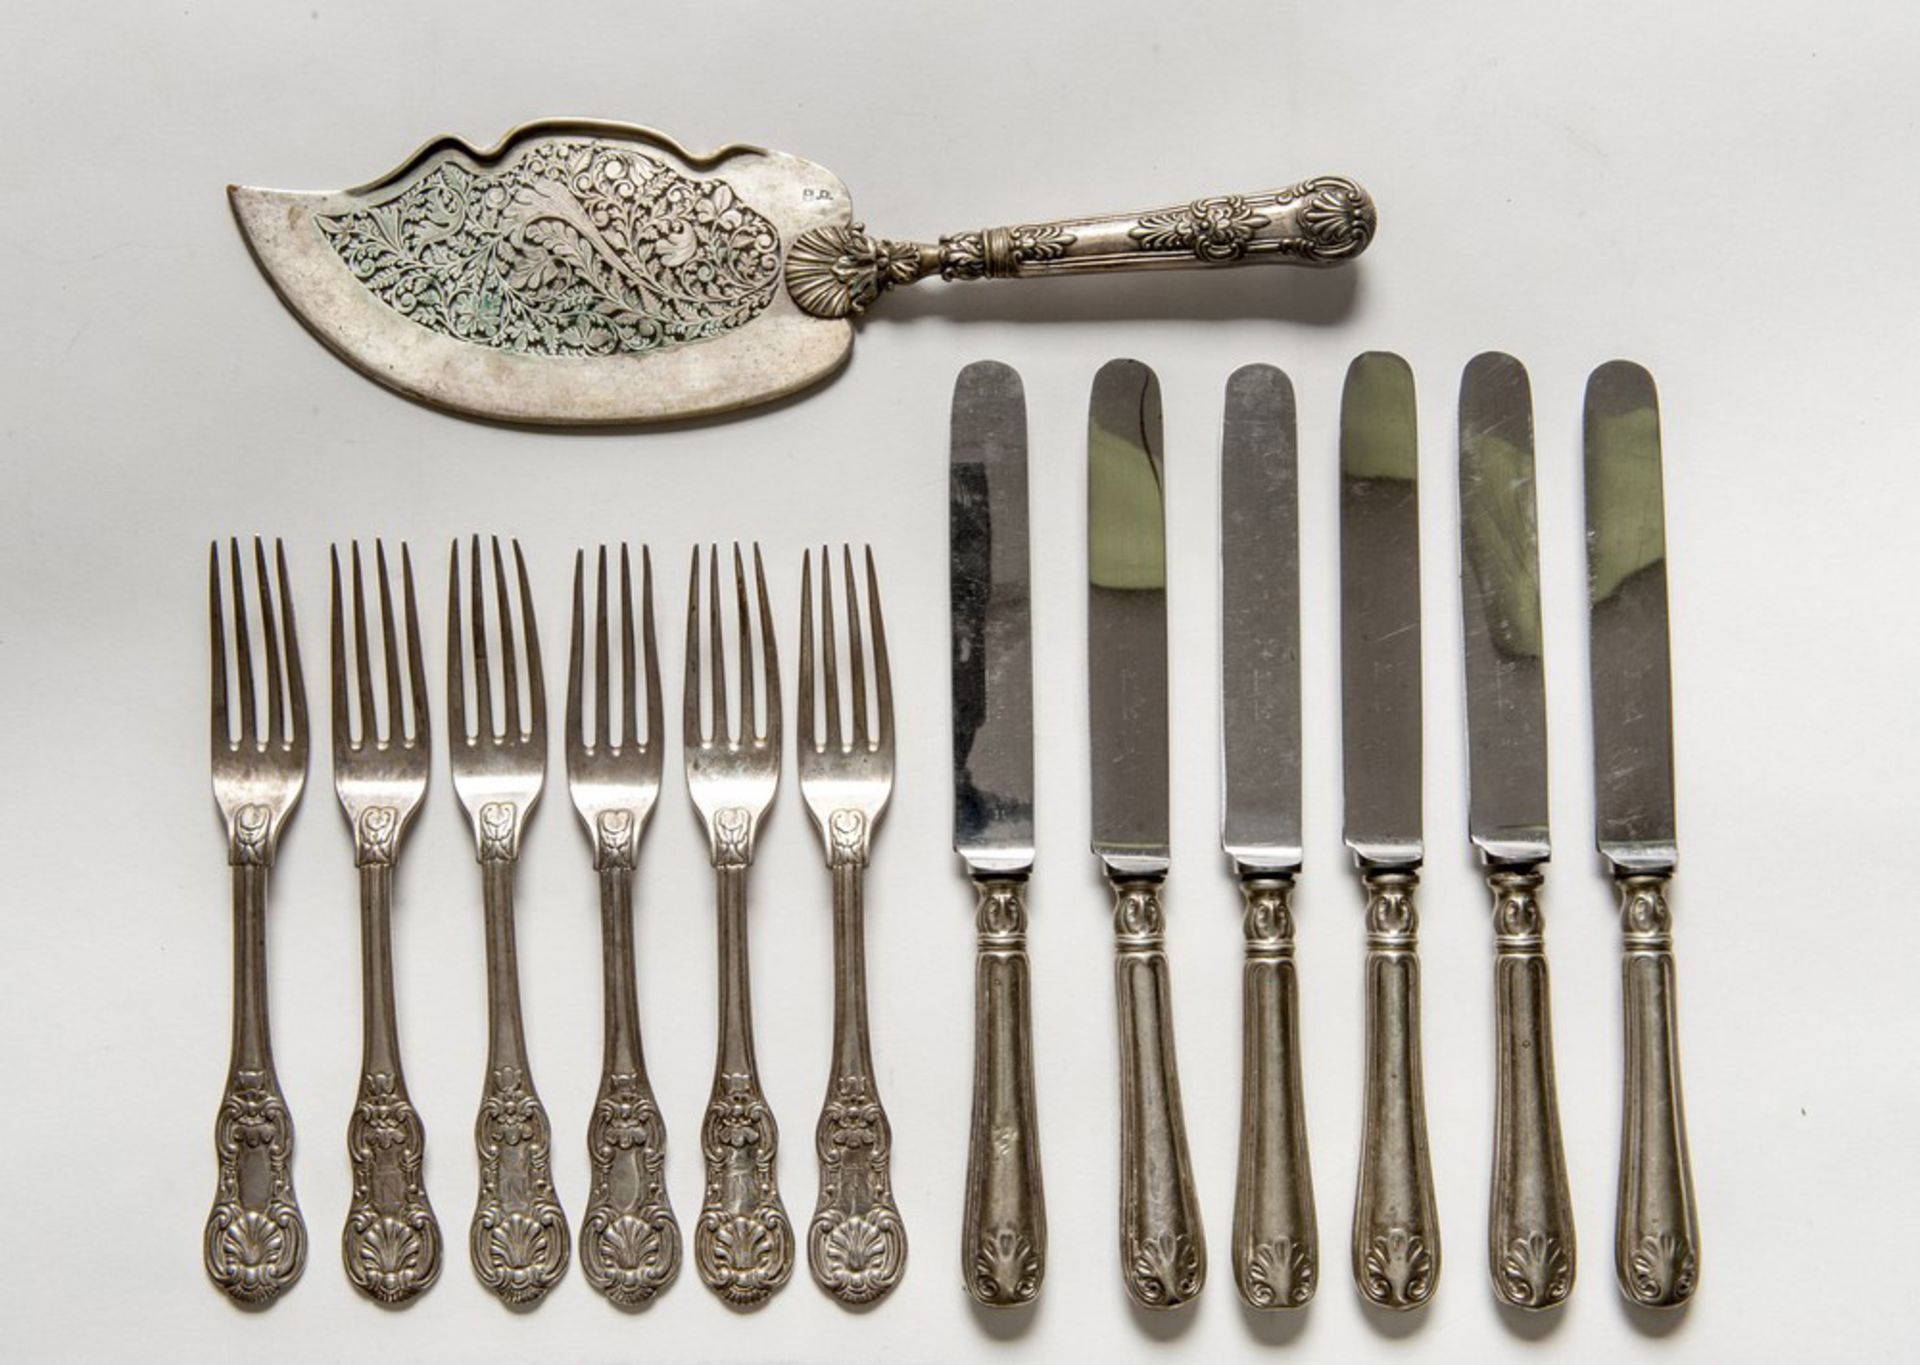 SERVICE OF SILVER CUTLERY, PUNCH KINGDOM OF THE TWO SICILIES, NAPLES 1832/1872 with handles chiseled